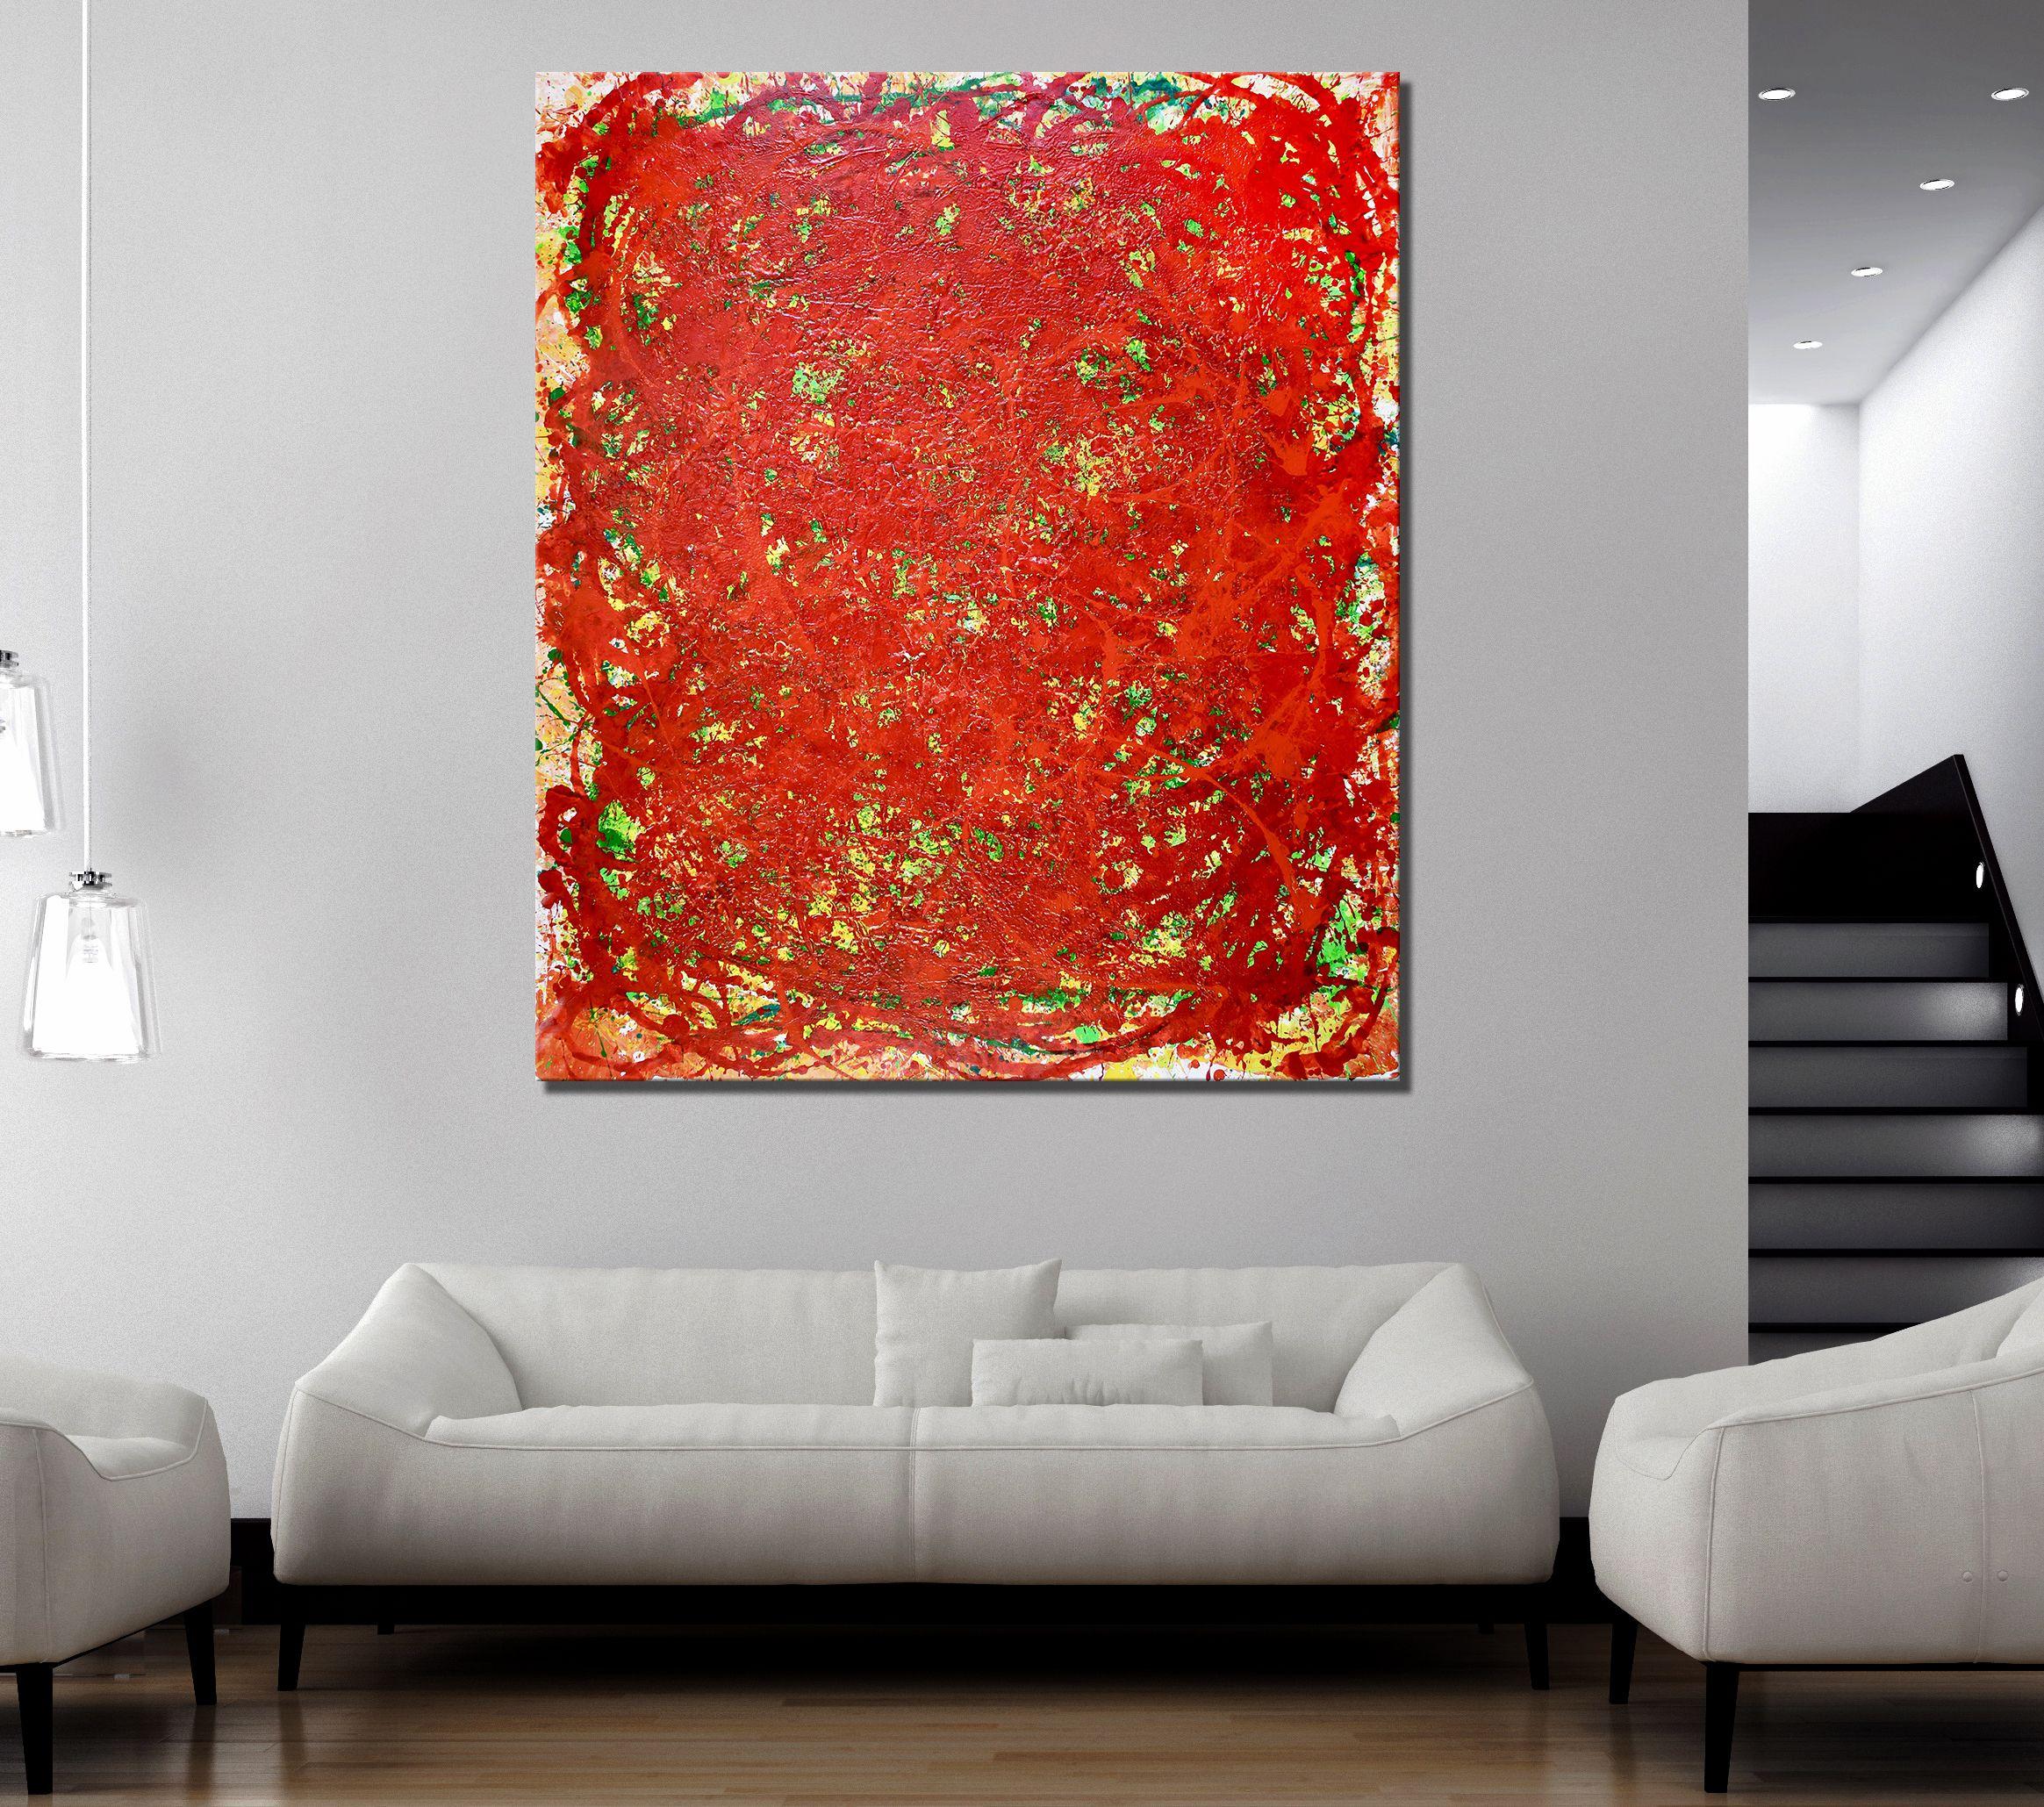 BOLD STATEMENT FOR A BOLD COLLECTOR!    This work is about red and making a bold statement with no apologies. This work is massive and the bold gestural painting style is mesmerizing to experience in person.    Vibrant, bold and intuitive painting